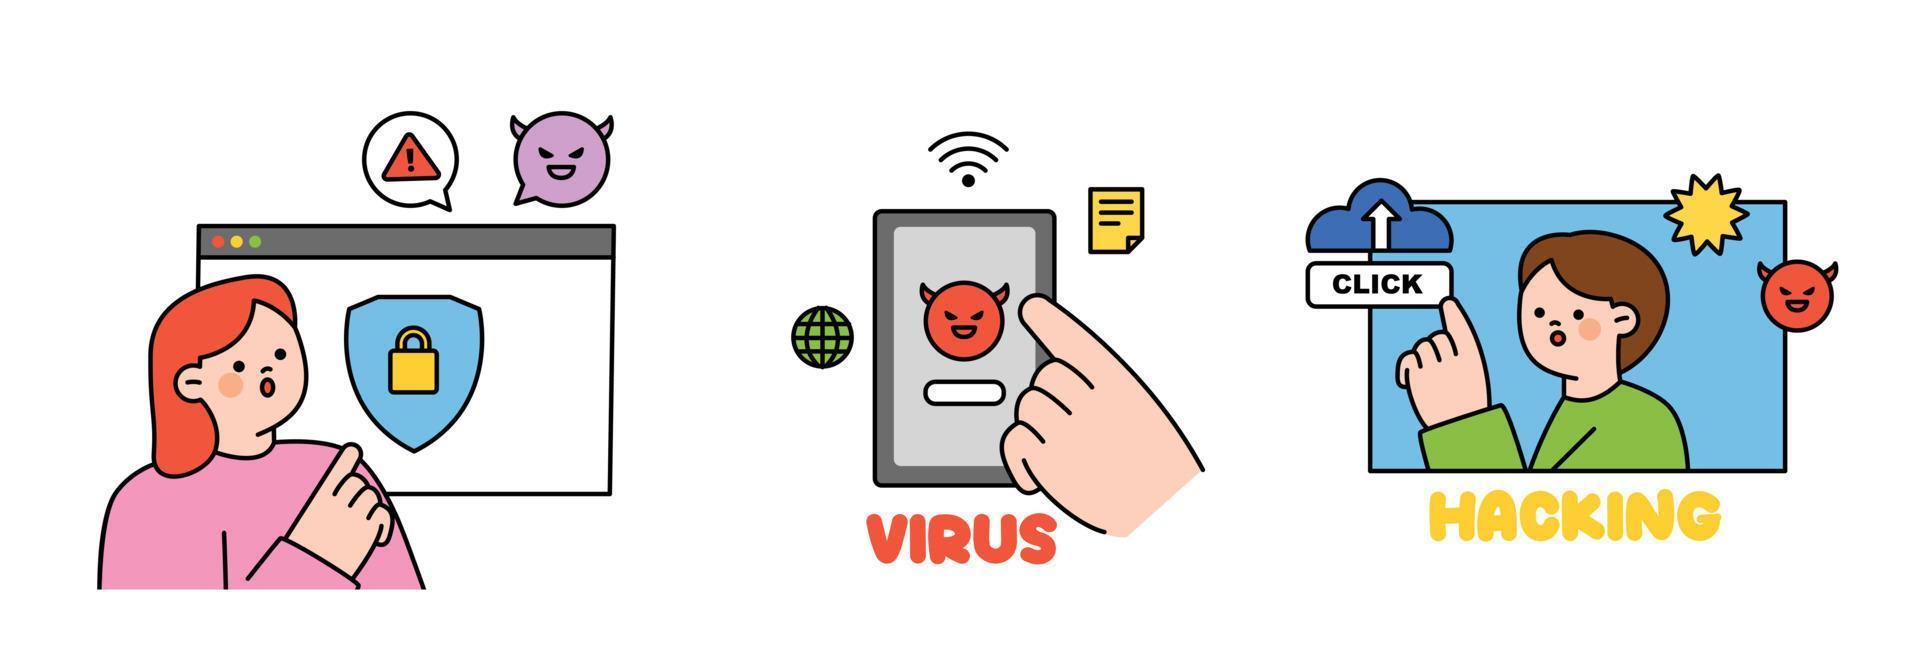 Security system to protect online virus computer and mobile. People are pressing the security icon on the screen. vector